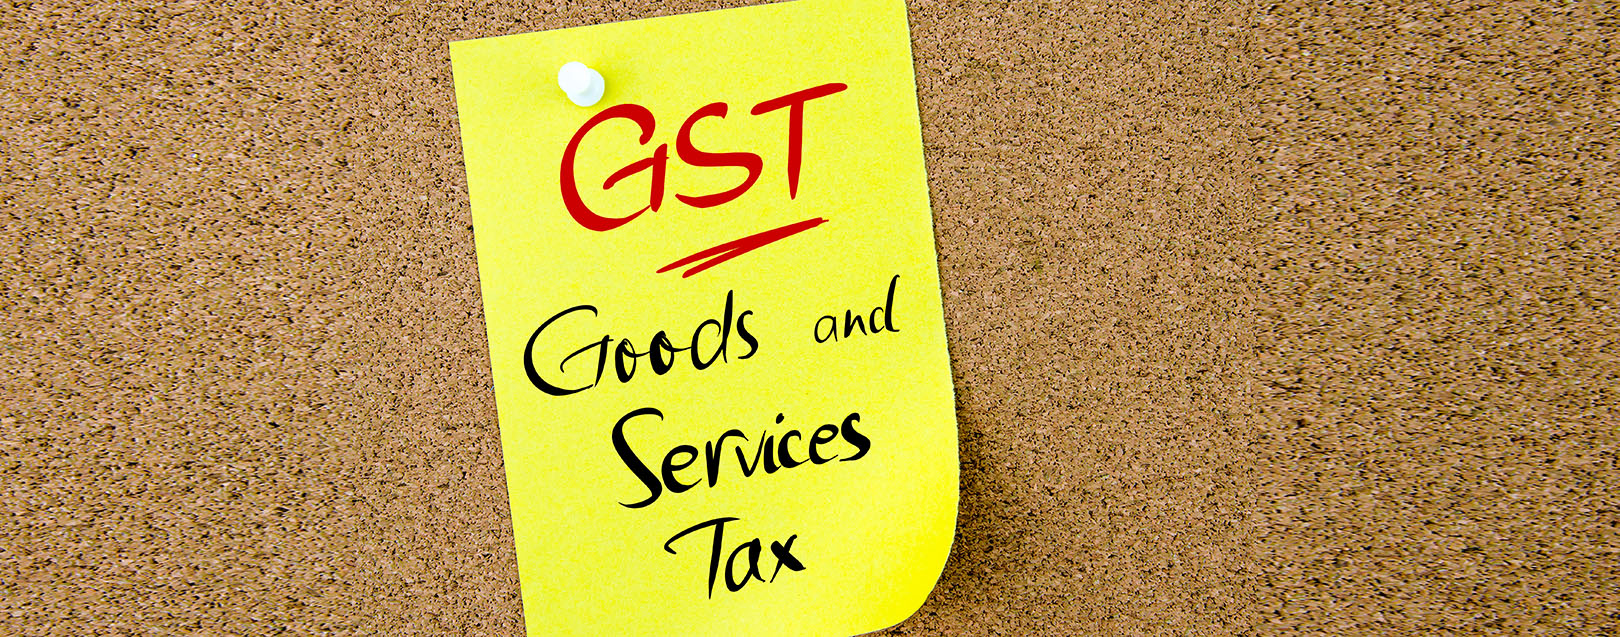 Reduce payment pendencies before GST roll-out: CBEC Chairman